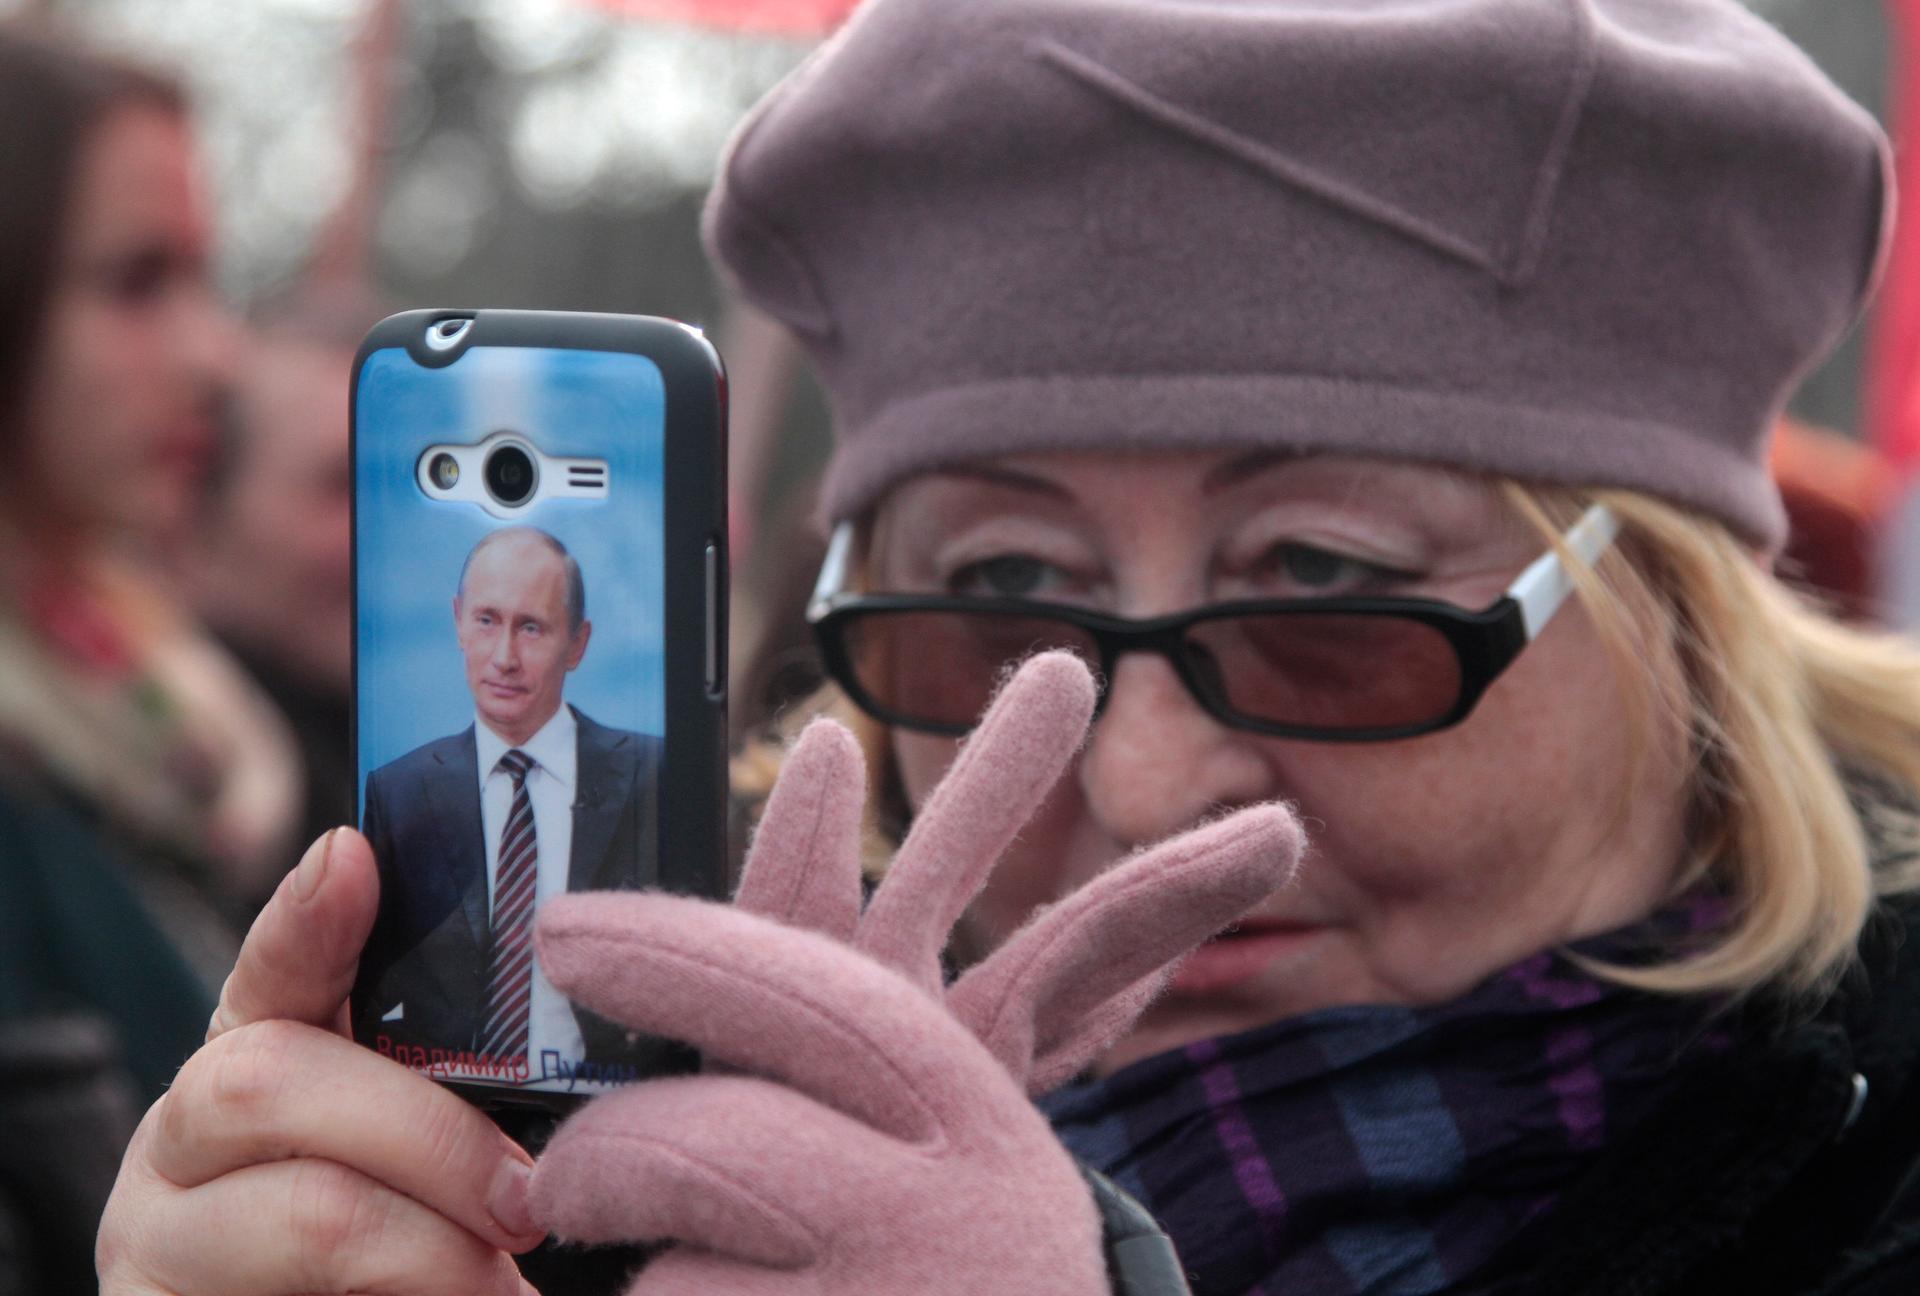 A woman holds a phone with a picture of Vladimir Putin on it.